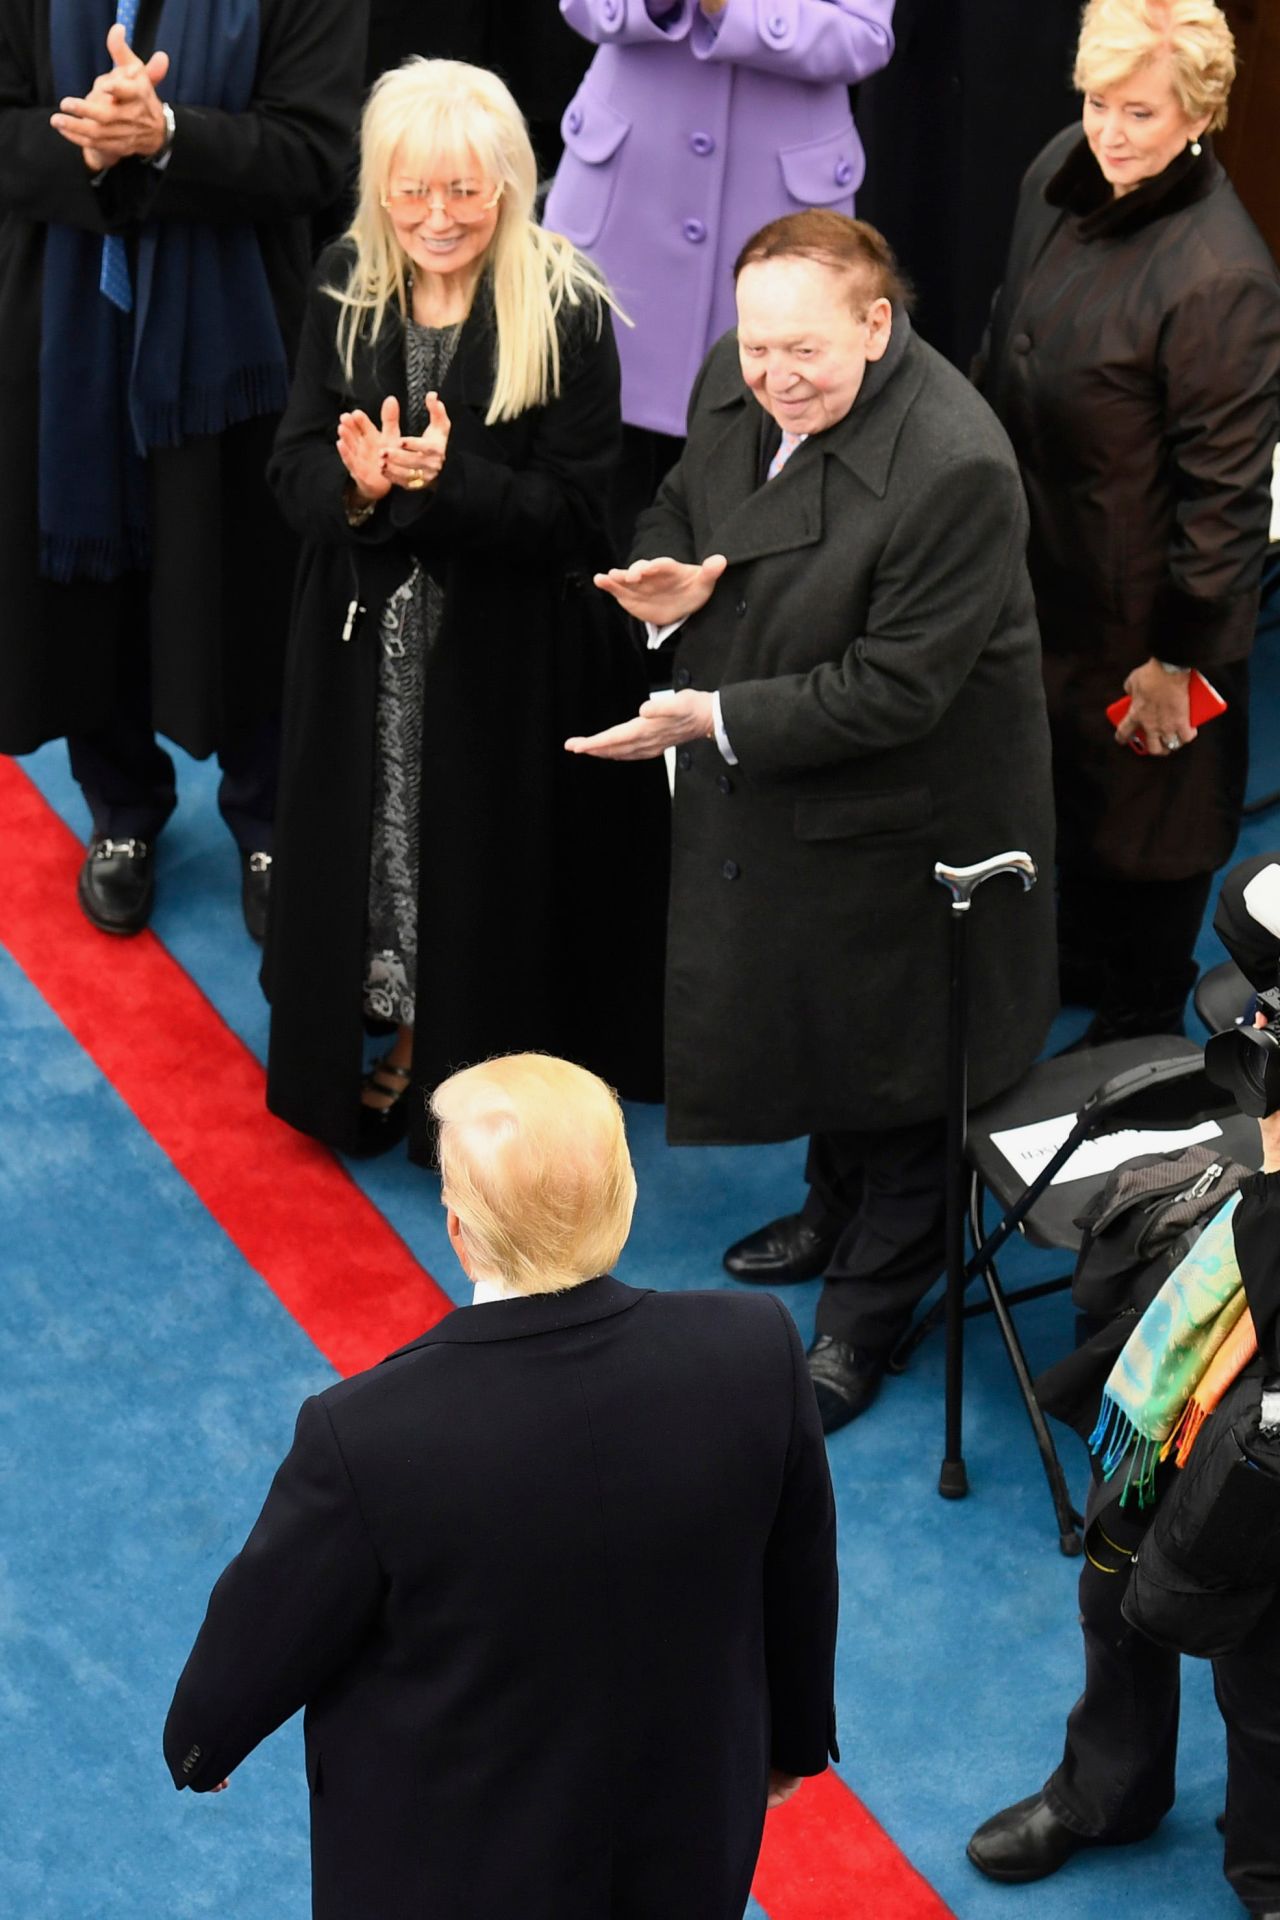 The Adelsons applaud President-elect Donald Trump at Trump's inauguration in 2017. Sheldon Adelson backed Trump when many traditional GOP donors were reluctant to support the candidate.